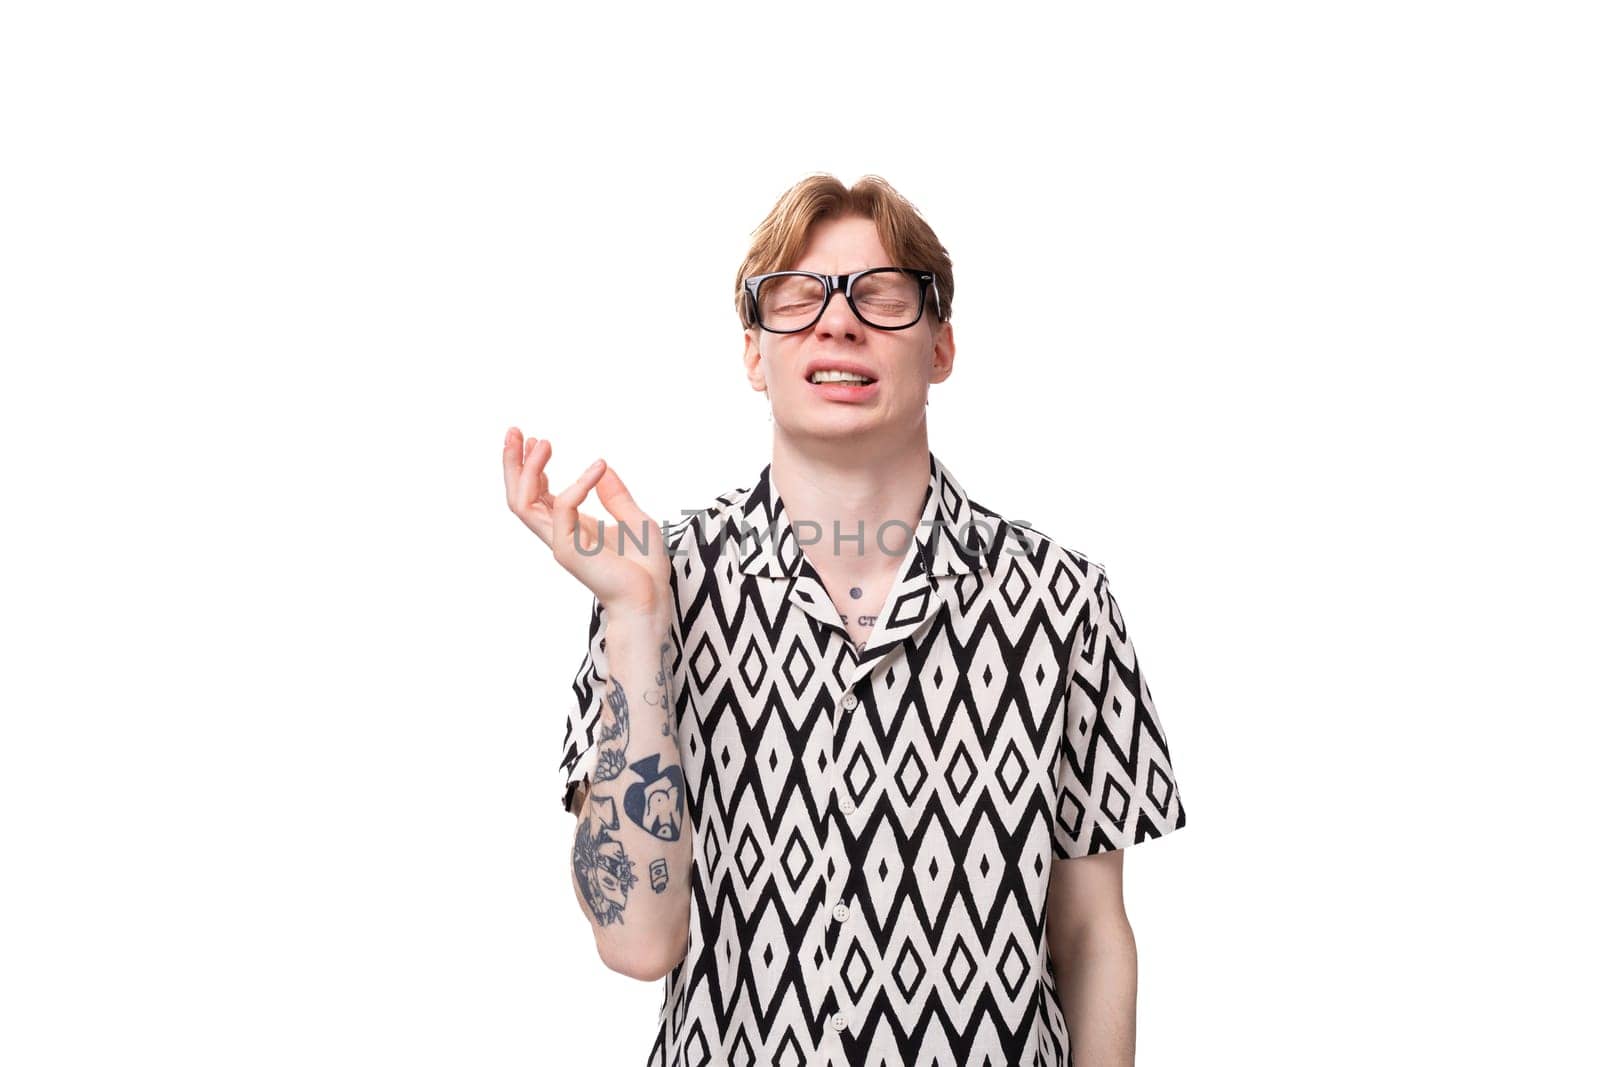 a young man with golden hair and a tattoo on his arms wears glasses for image and a black and white shirt by TRMK